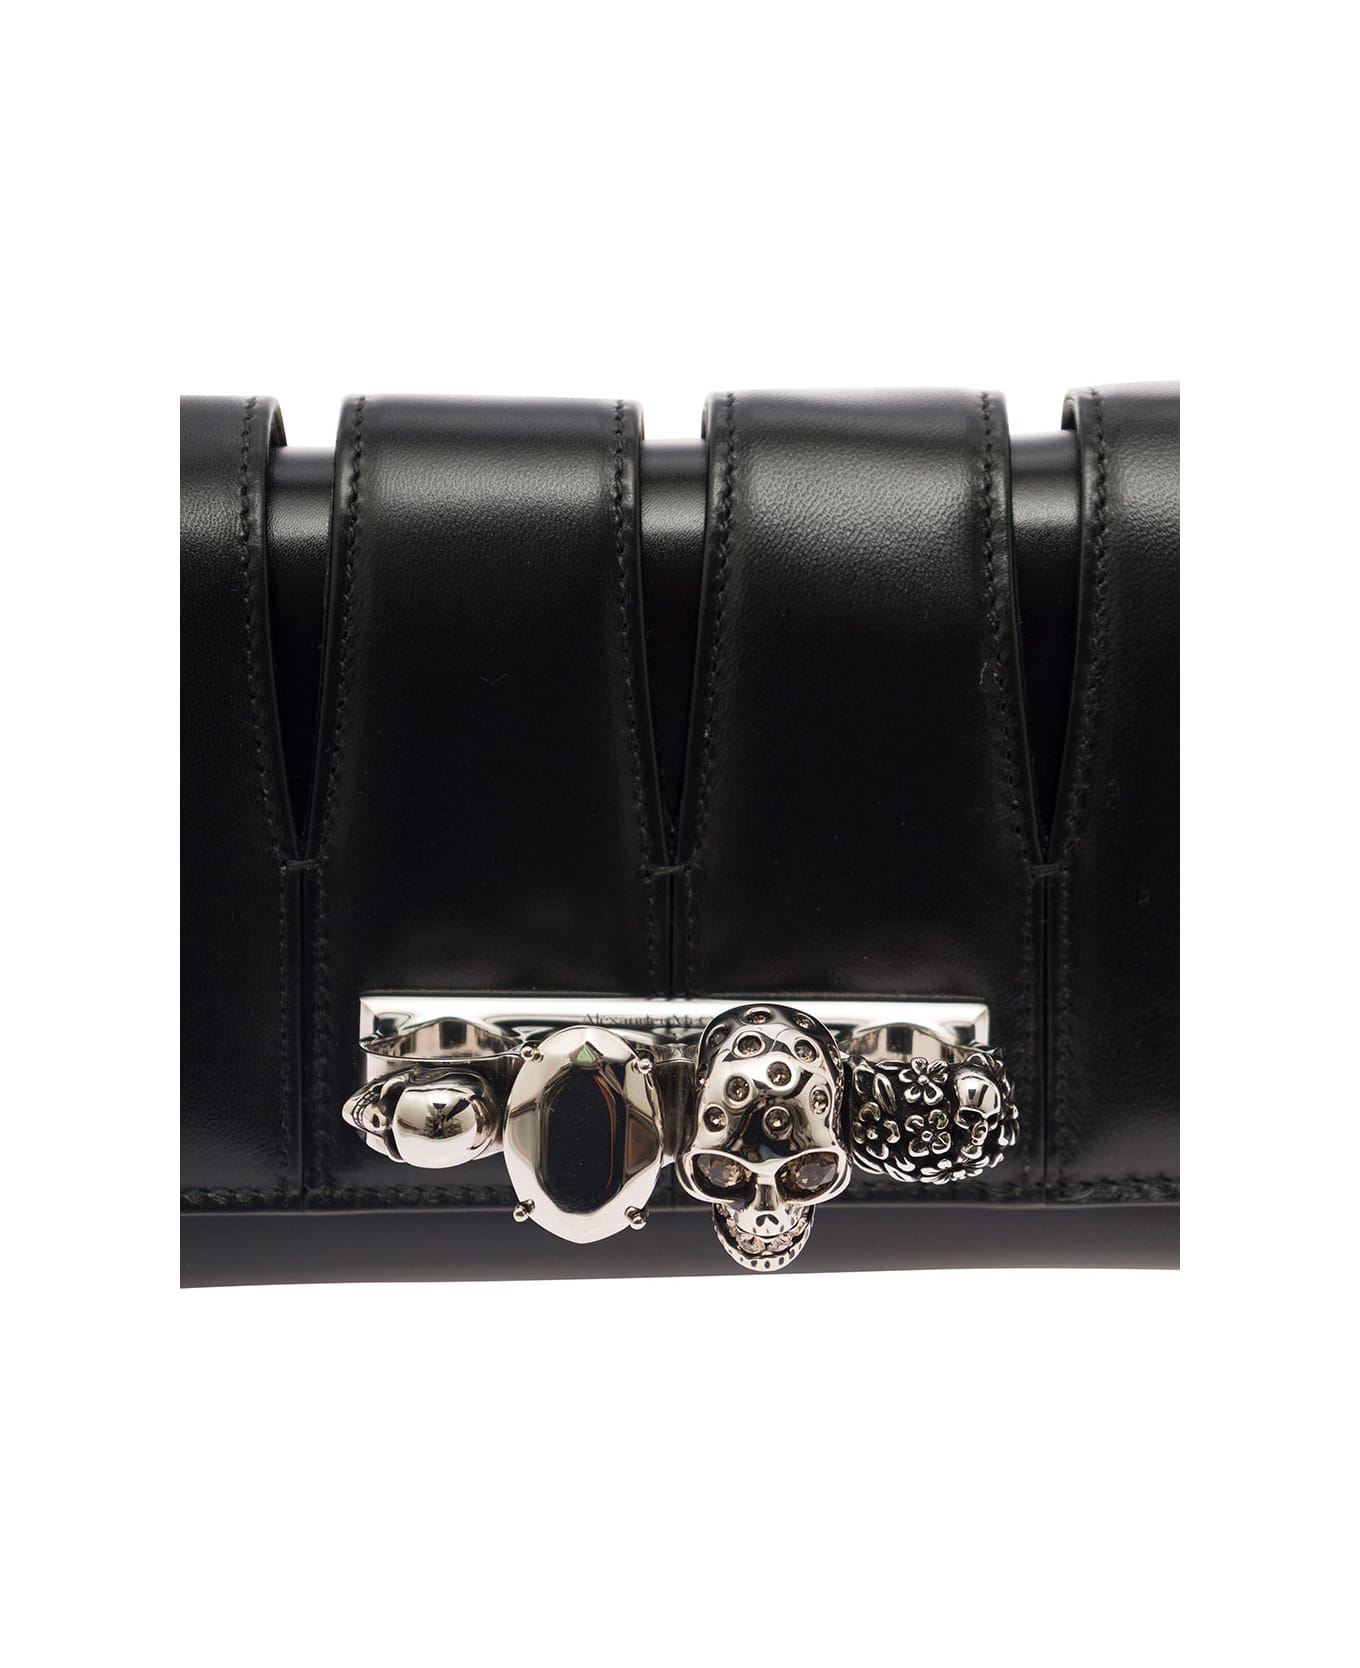 Alexander McQueen 'the Slush' Black Clutch With Skull Detail In Leather Woman - Black